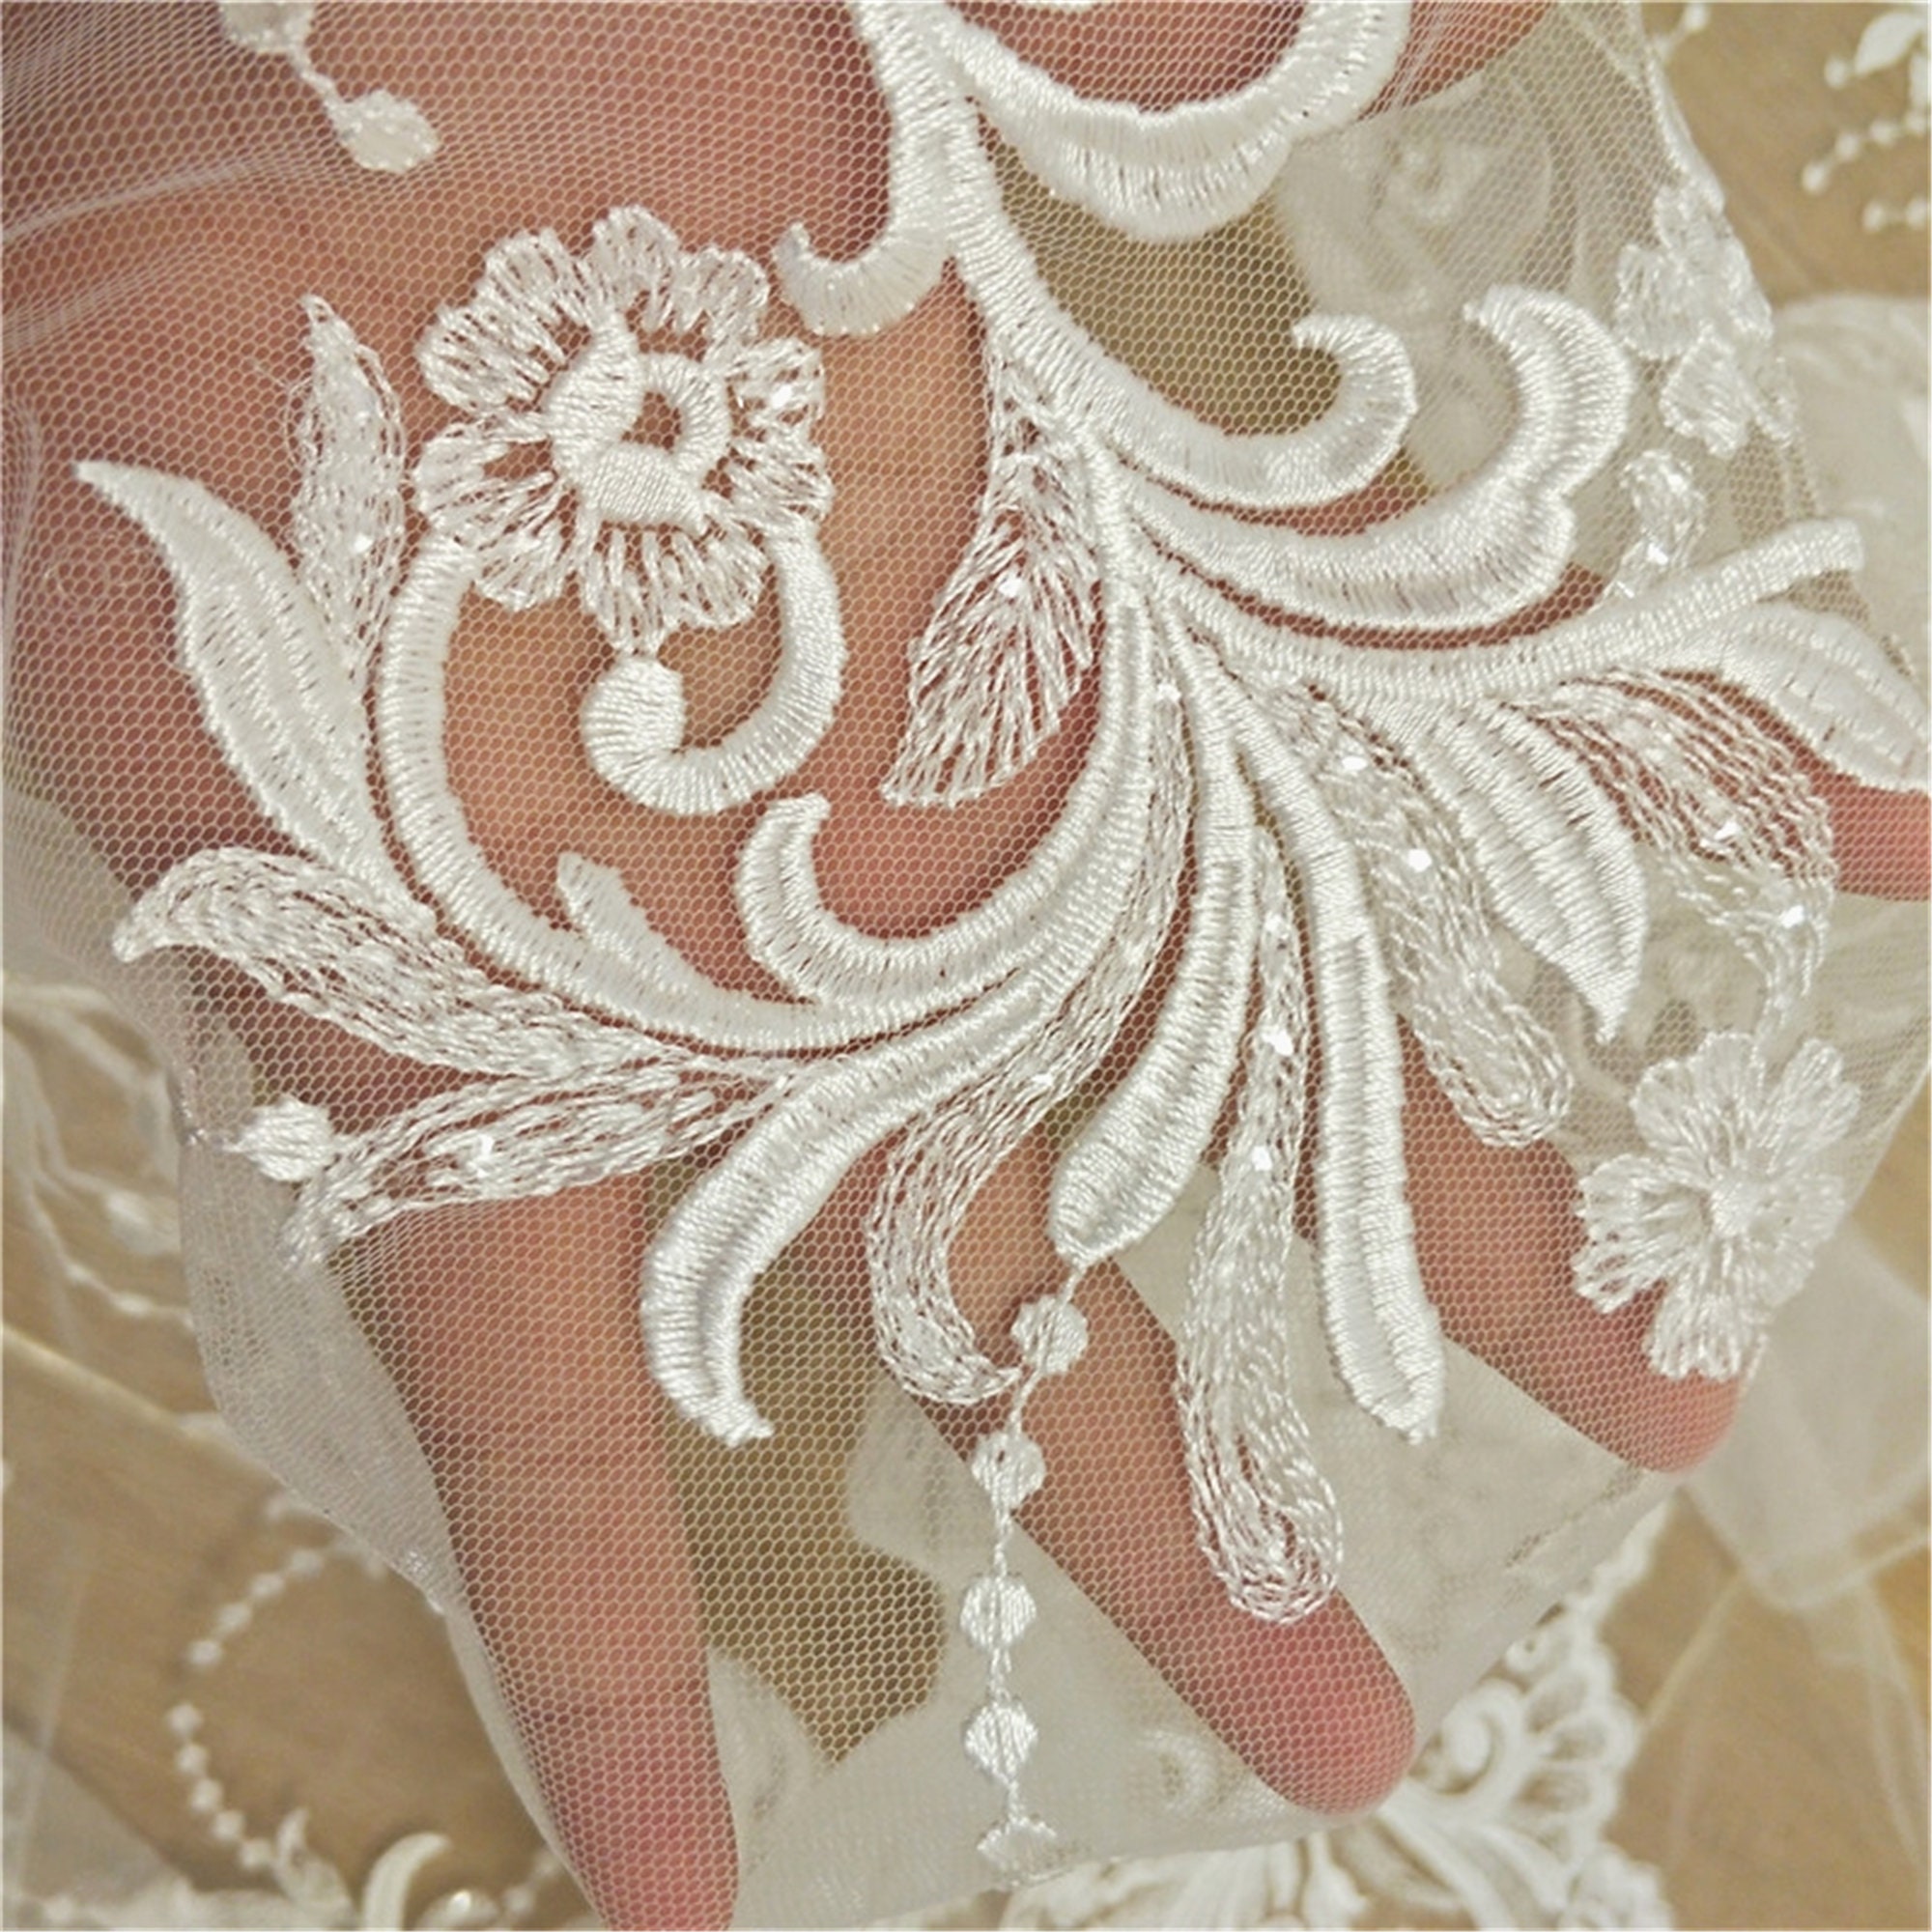 Exquisite Embroidery Lace Fabric for Girls Skirt Wedding - Etsy